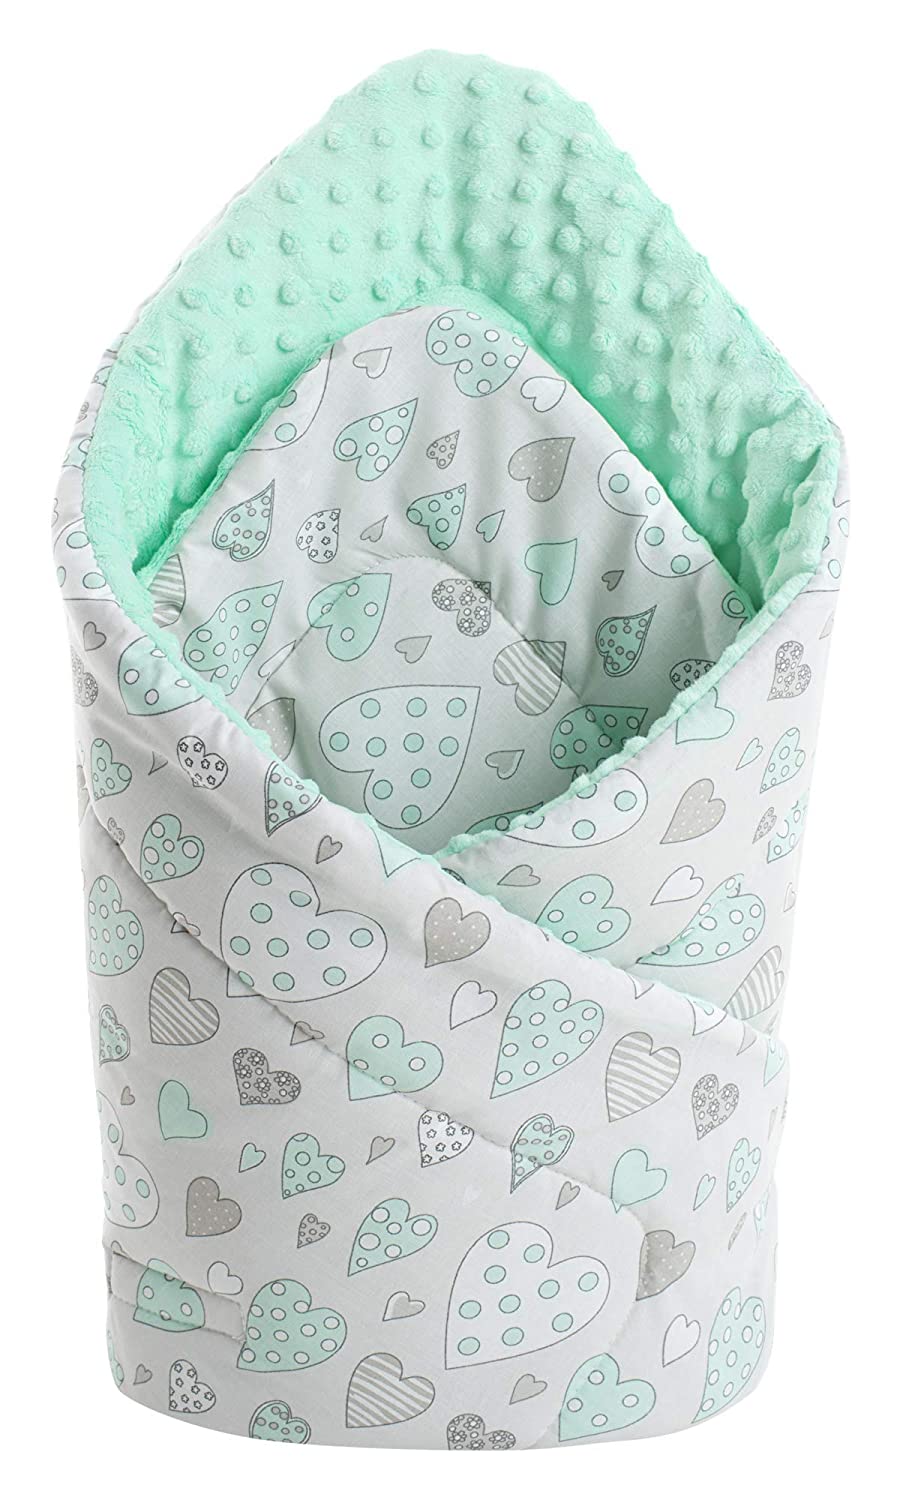 Swaddling blanket plug-in pillow Minky 100% cotton 75 x 75 cm sleeping bag double sided soft all year round multifunctional anti-allergic baby media partners (mint hearts with mint minky)